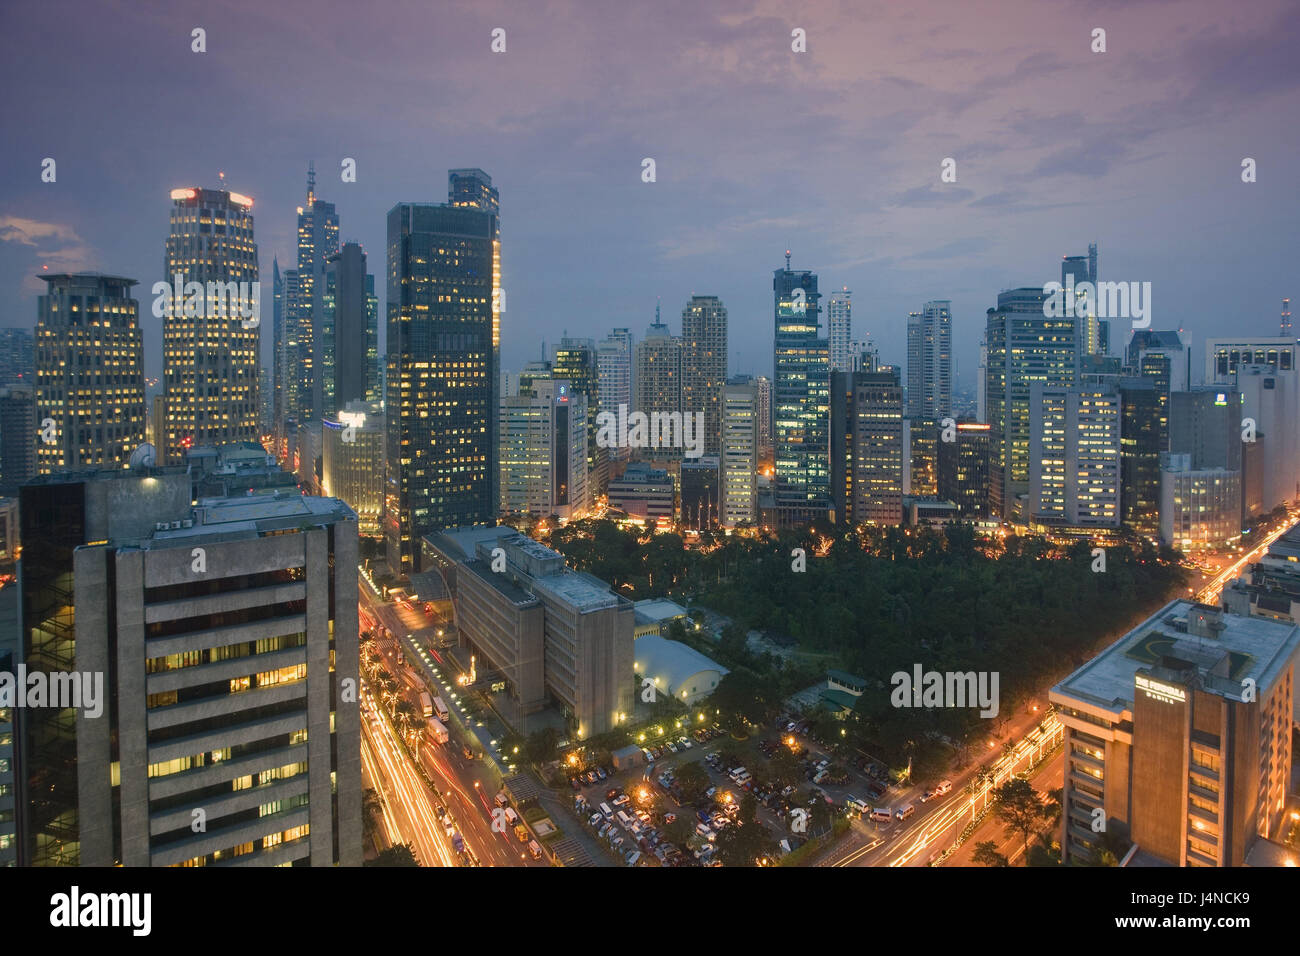 The Philippines, island Luzon, Manila, Makati District, high rises, lights, dusk, Asia, South-East Asia, town, capital, city, building, architecture, business premises, lighting, dusk, Stock Photo